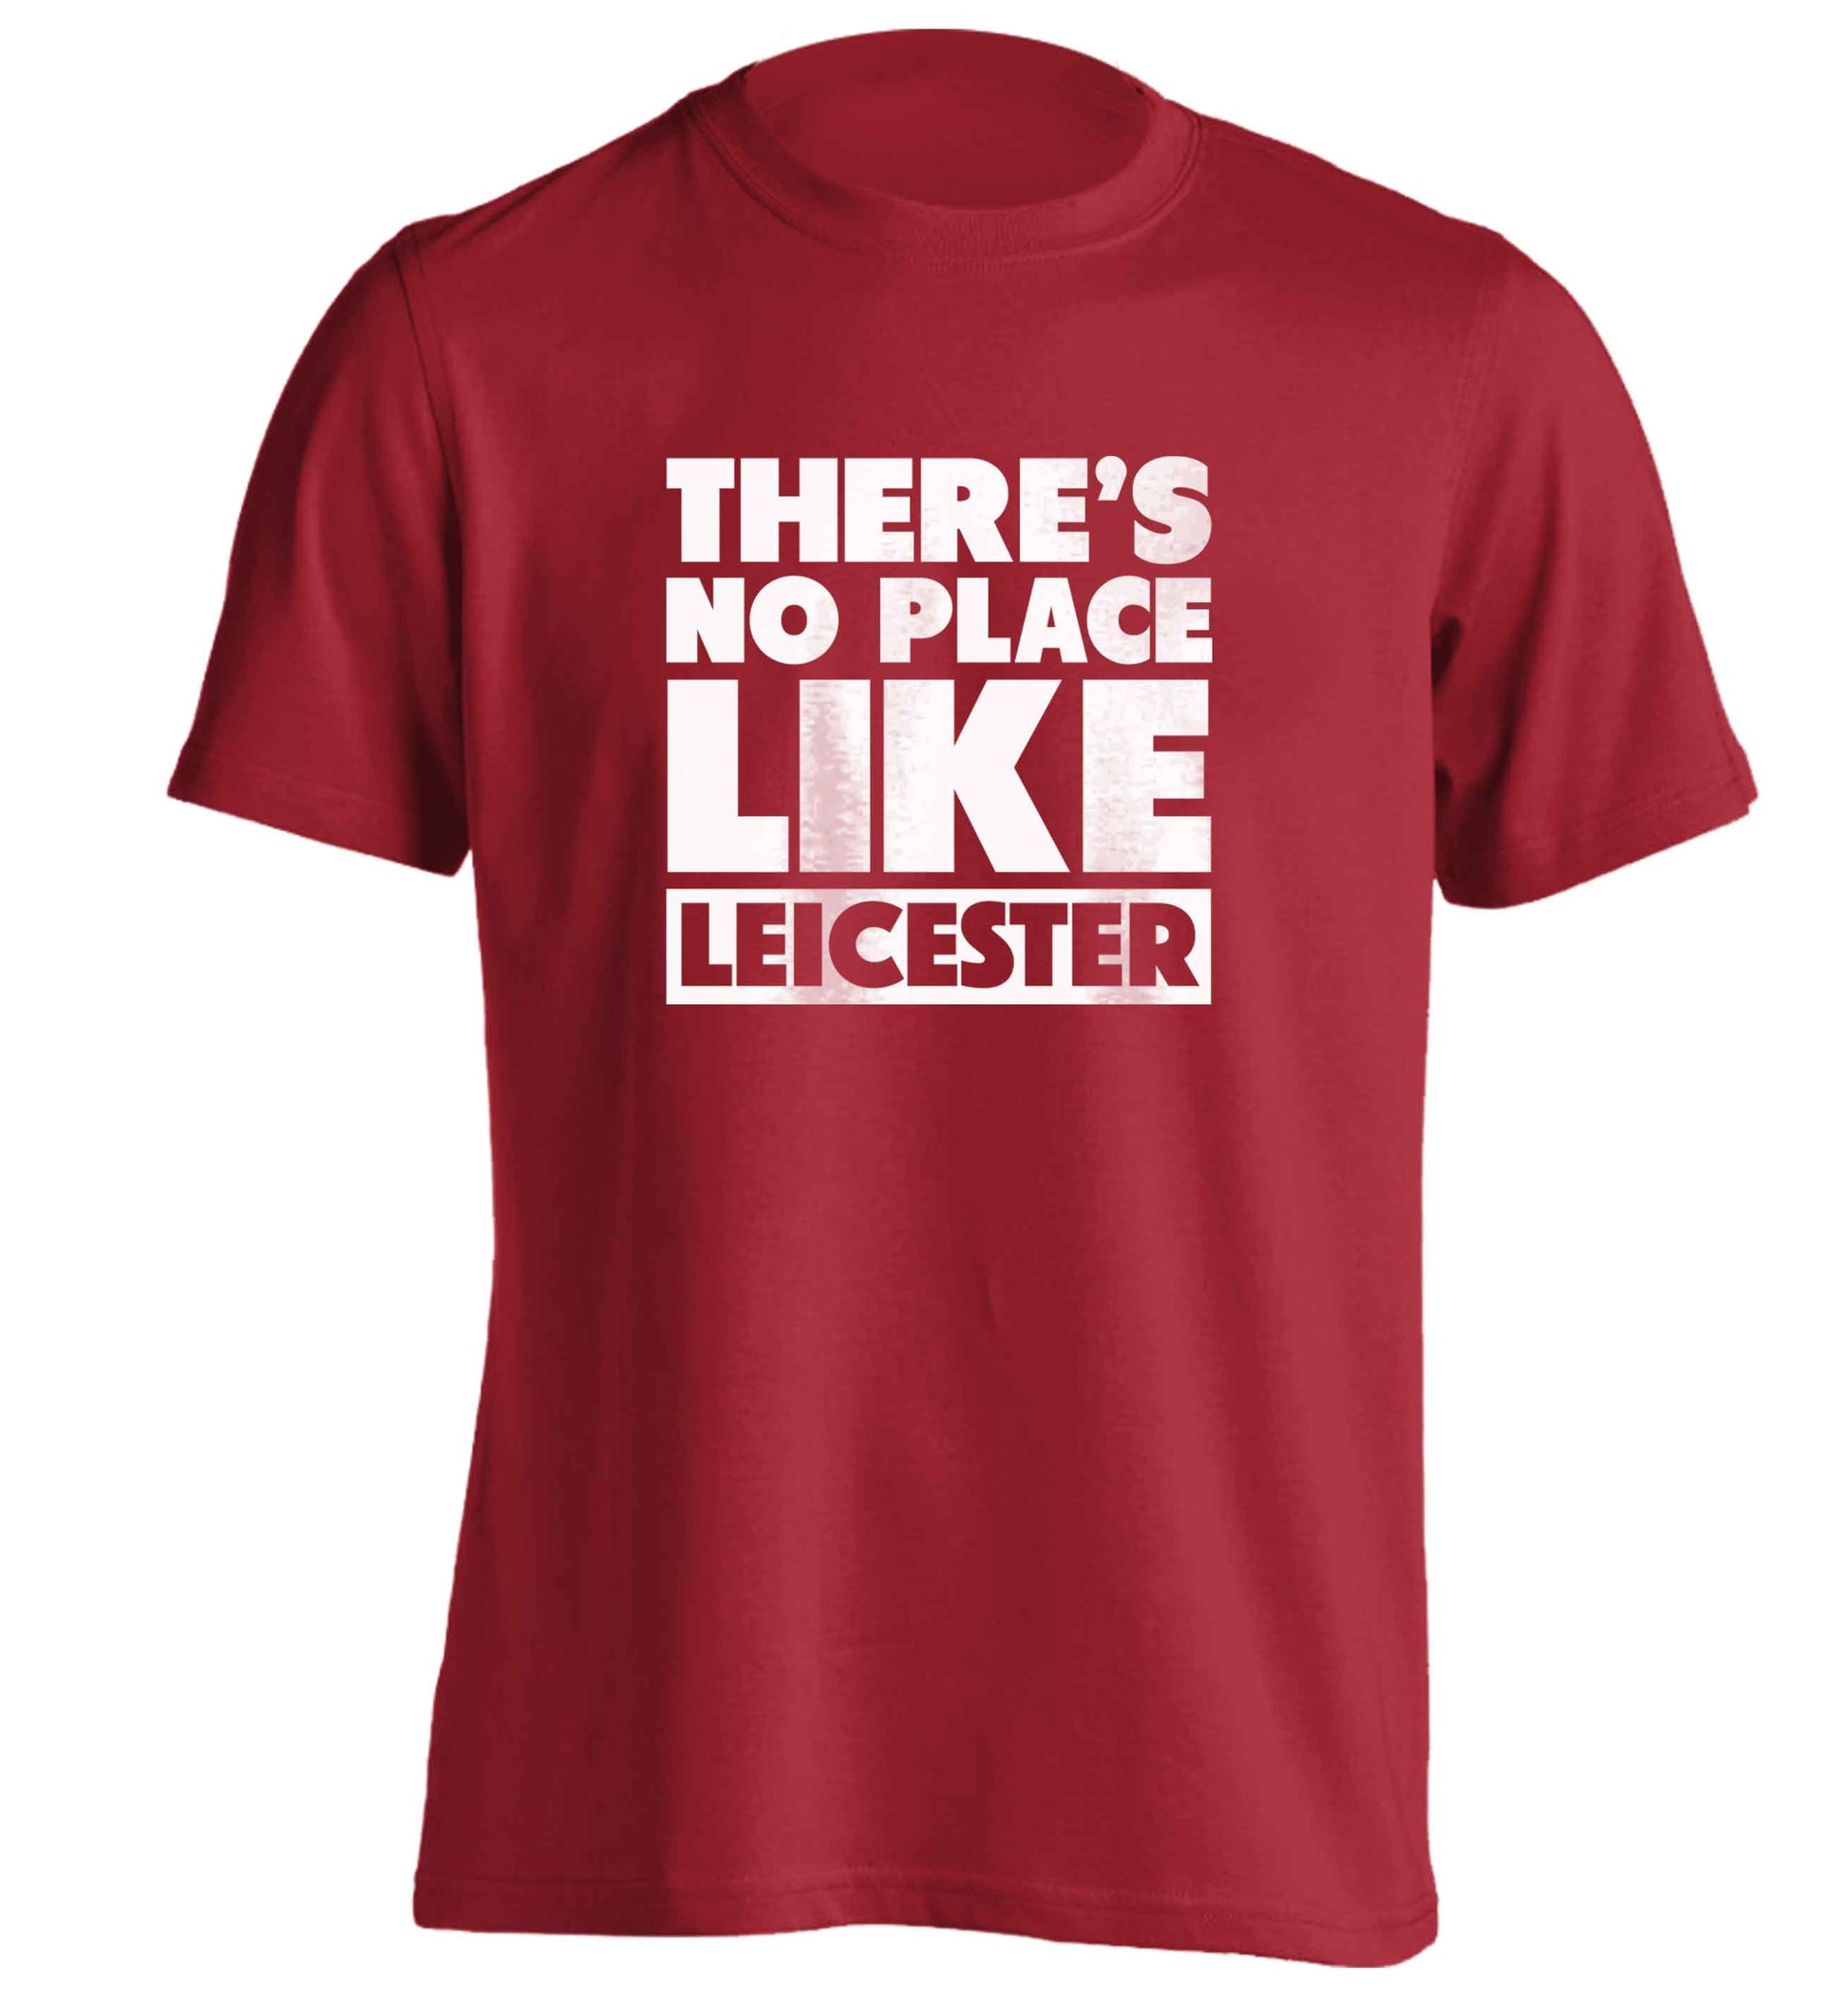 There's no place like Leicester adults unisex red Tshirt 2XL